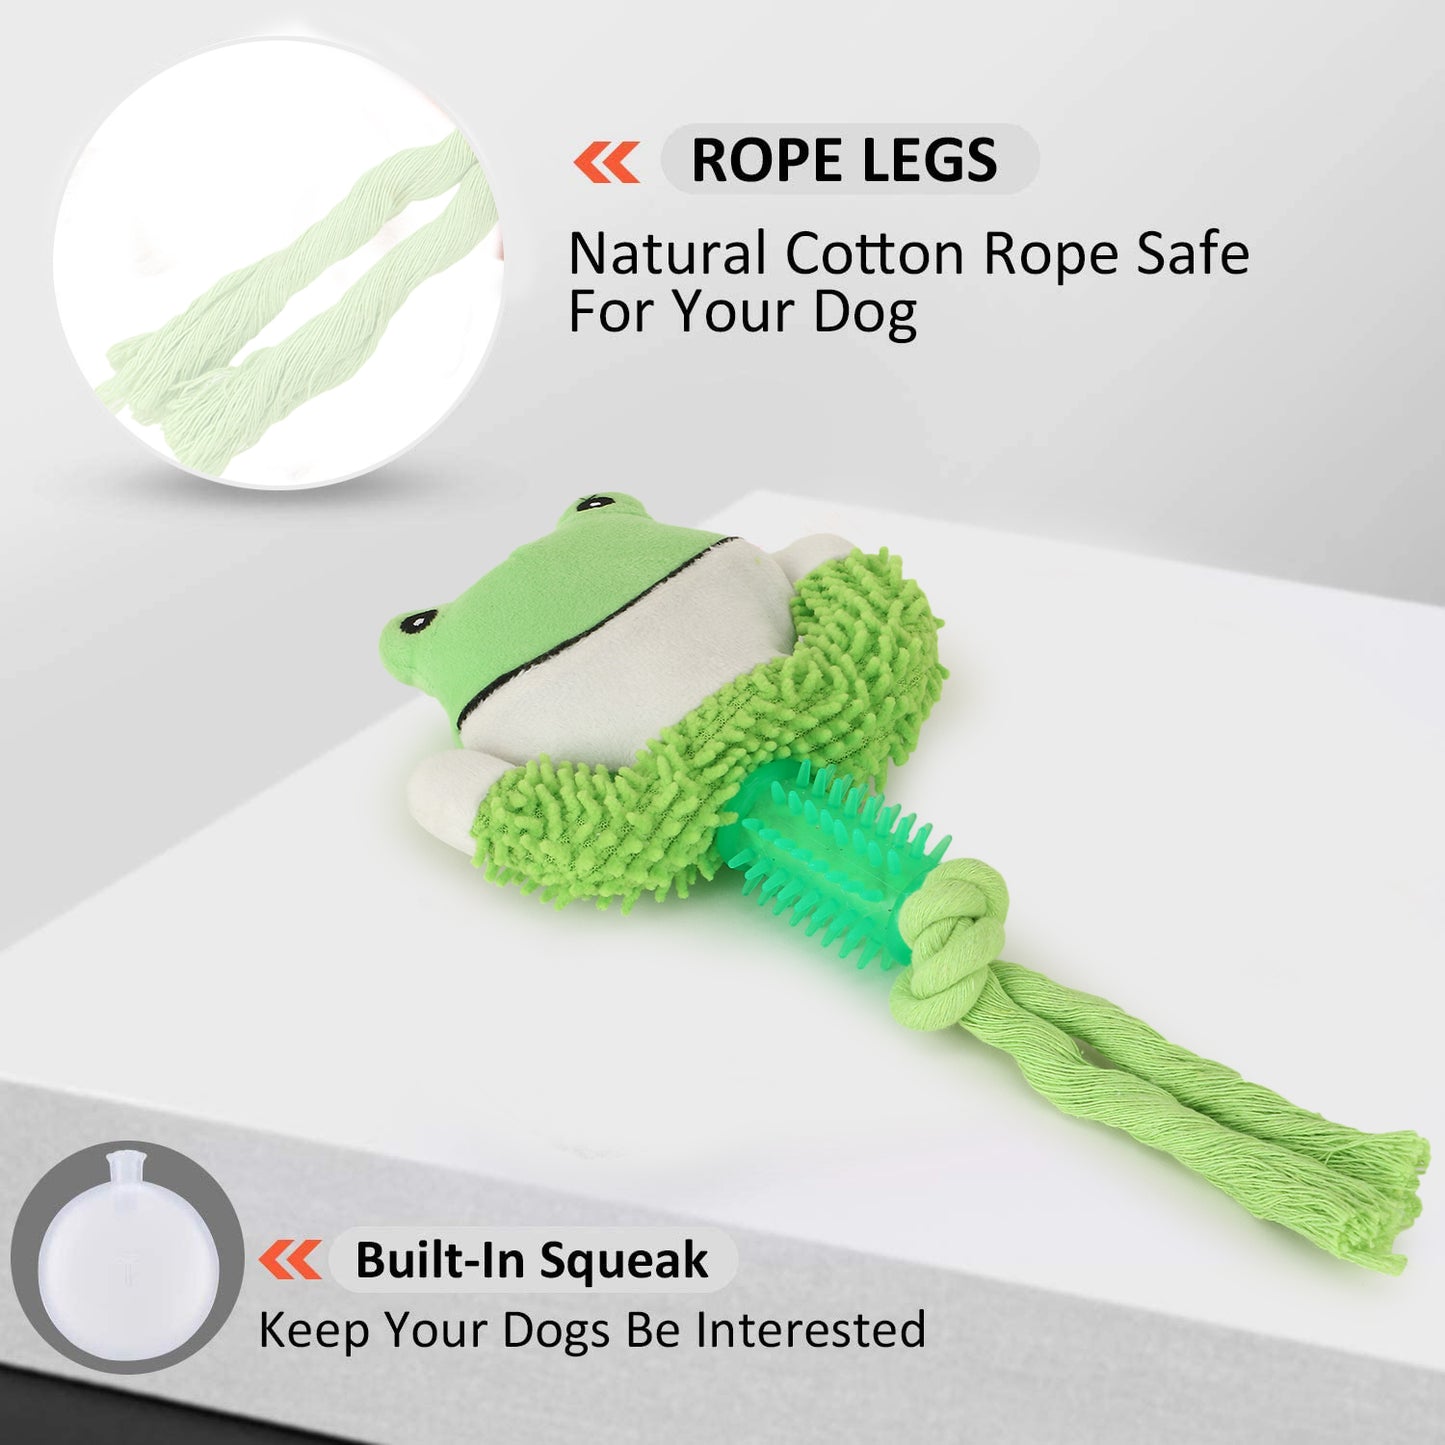 BASIL Plush toy with Rope Green